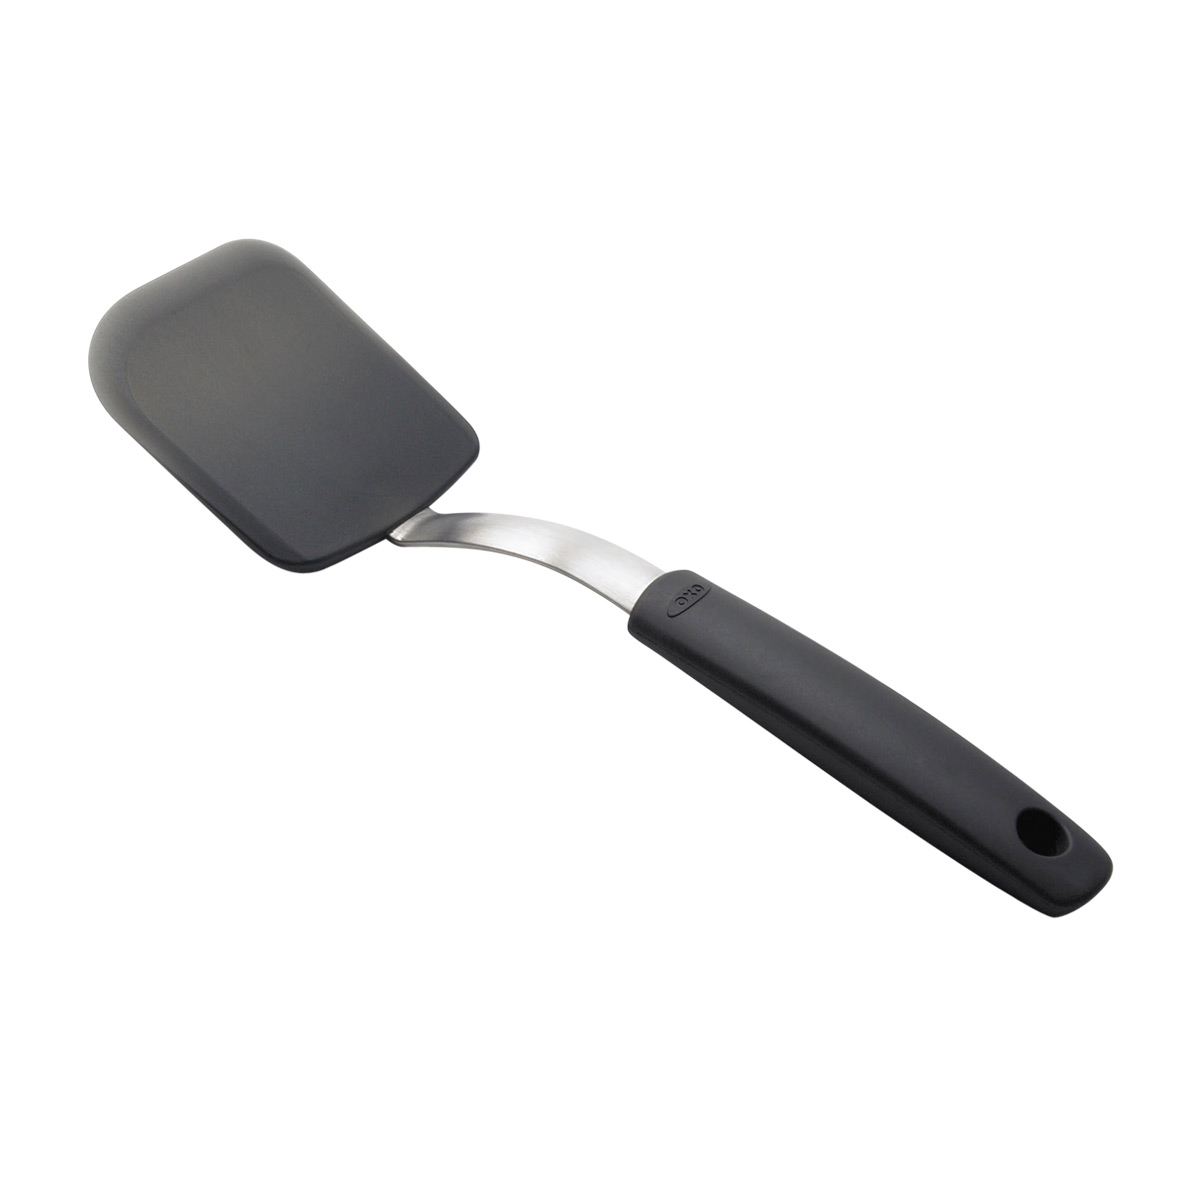 https://www.containerstore.com/catalogimages/347506/10076045-OXO-Cookie-Spatula-VEN1.jpg